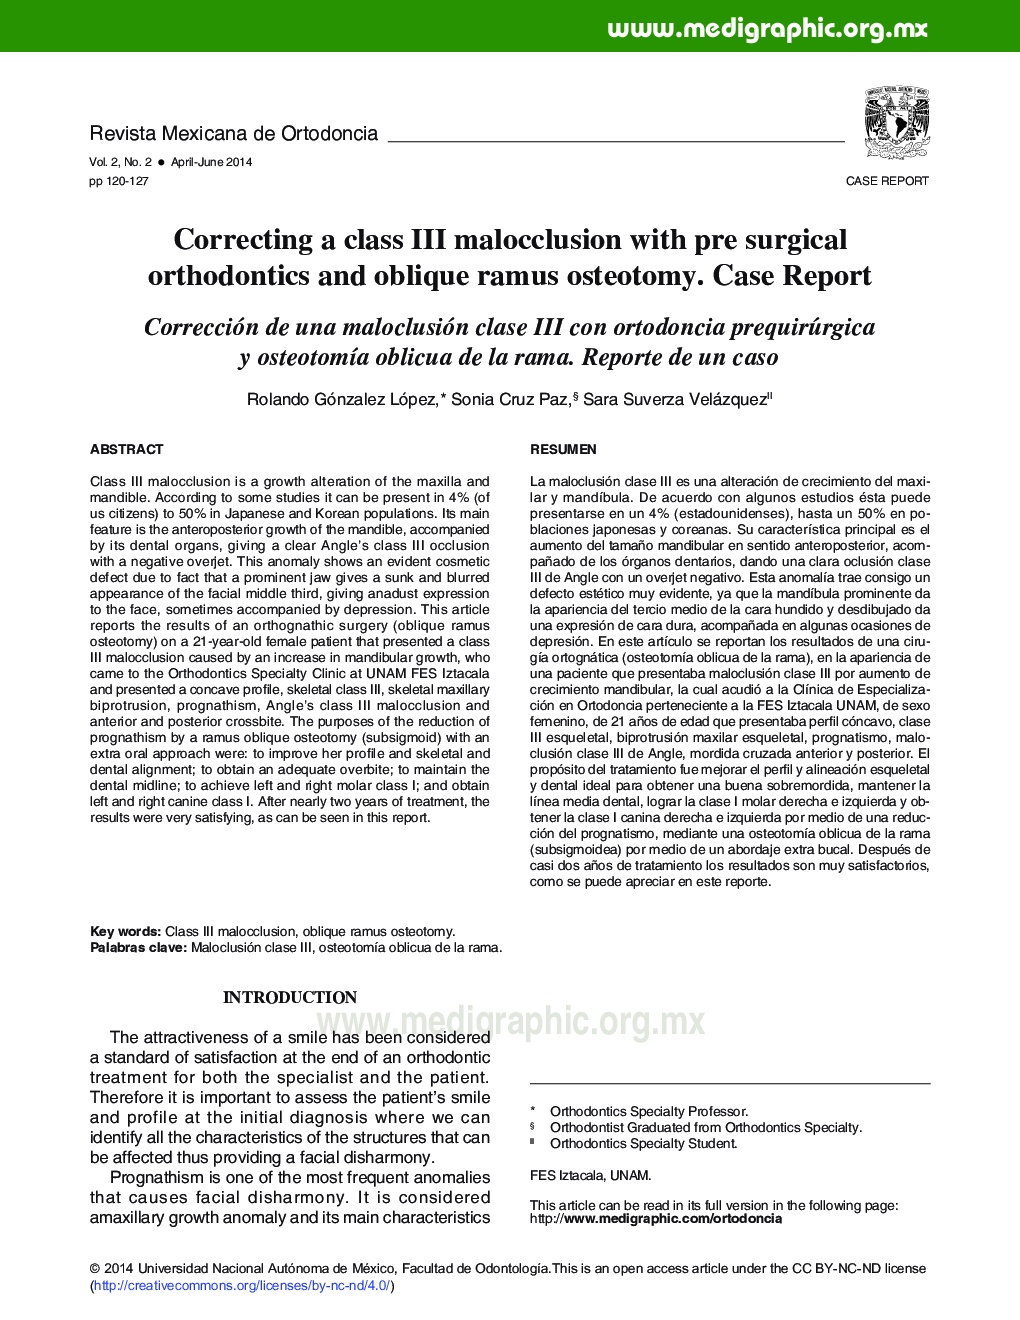 Correcting a class III malocclusion with pre surgical orthodontics and oblique ramus osteotomy. Case Report